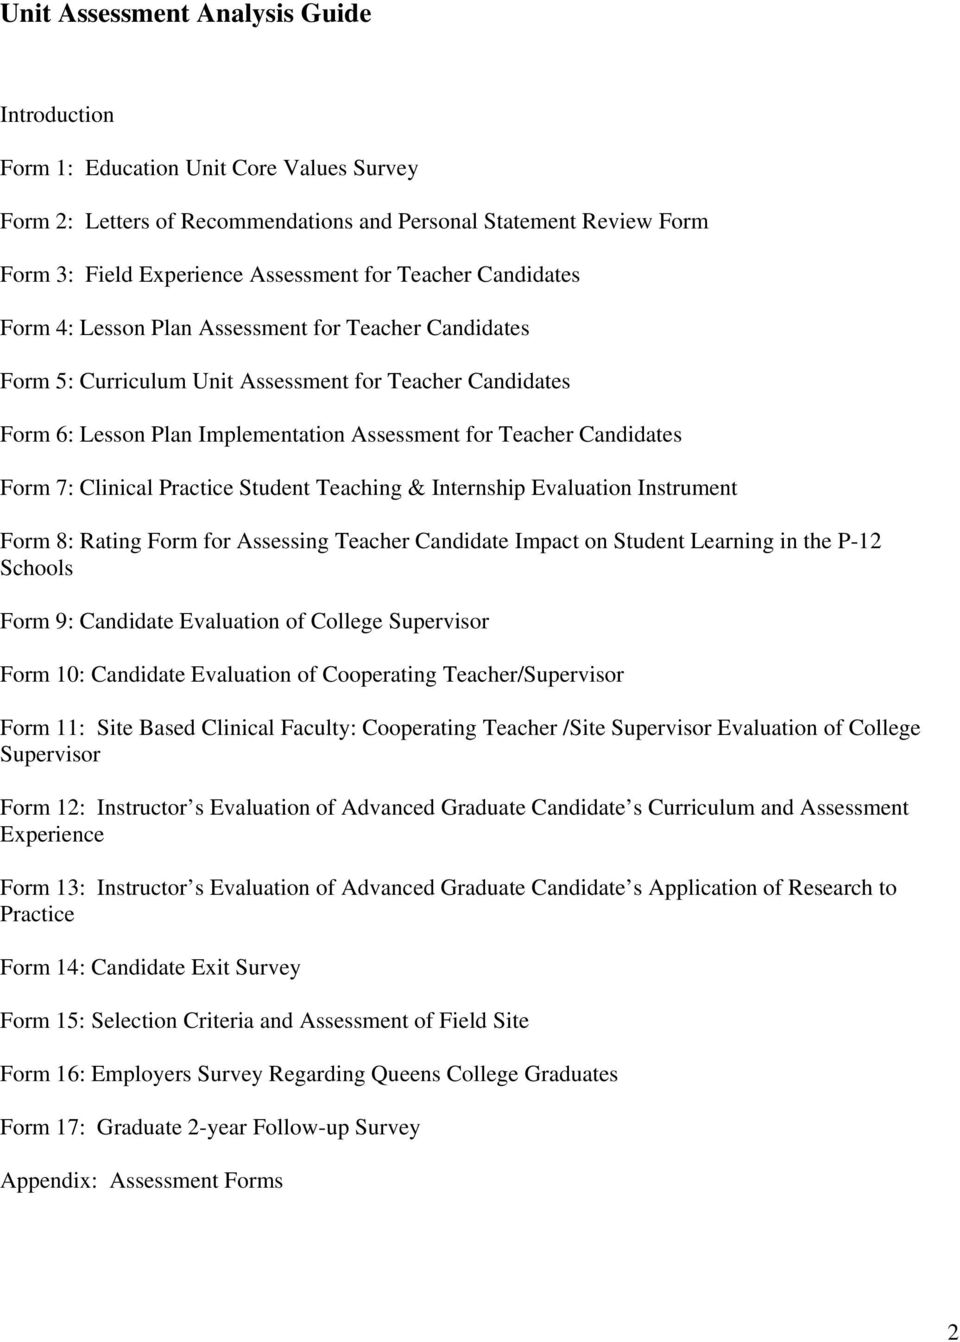 Form 7: Clinical Practice Student Teaching & Internship Evaluation Instrument Form 8: Rating Form for Assessing Teacher Candidate Impact on Student Learning in the P-12 Schools Form 9: Candidate